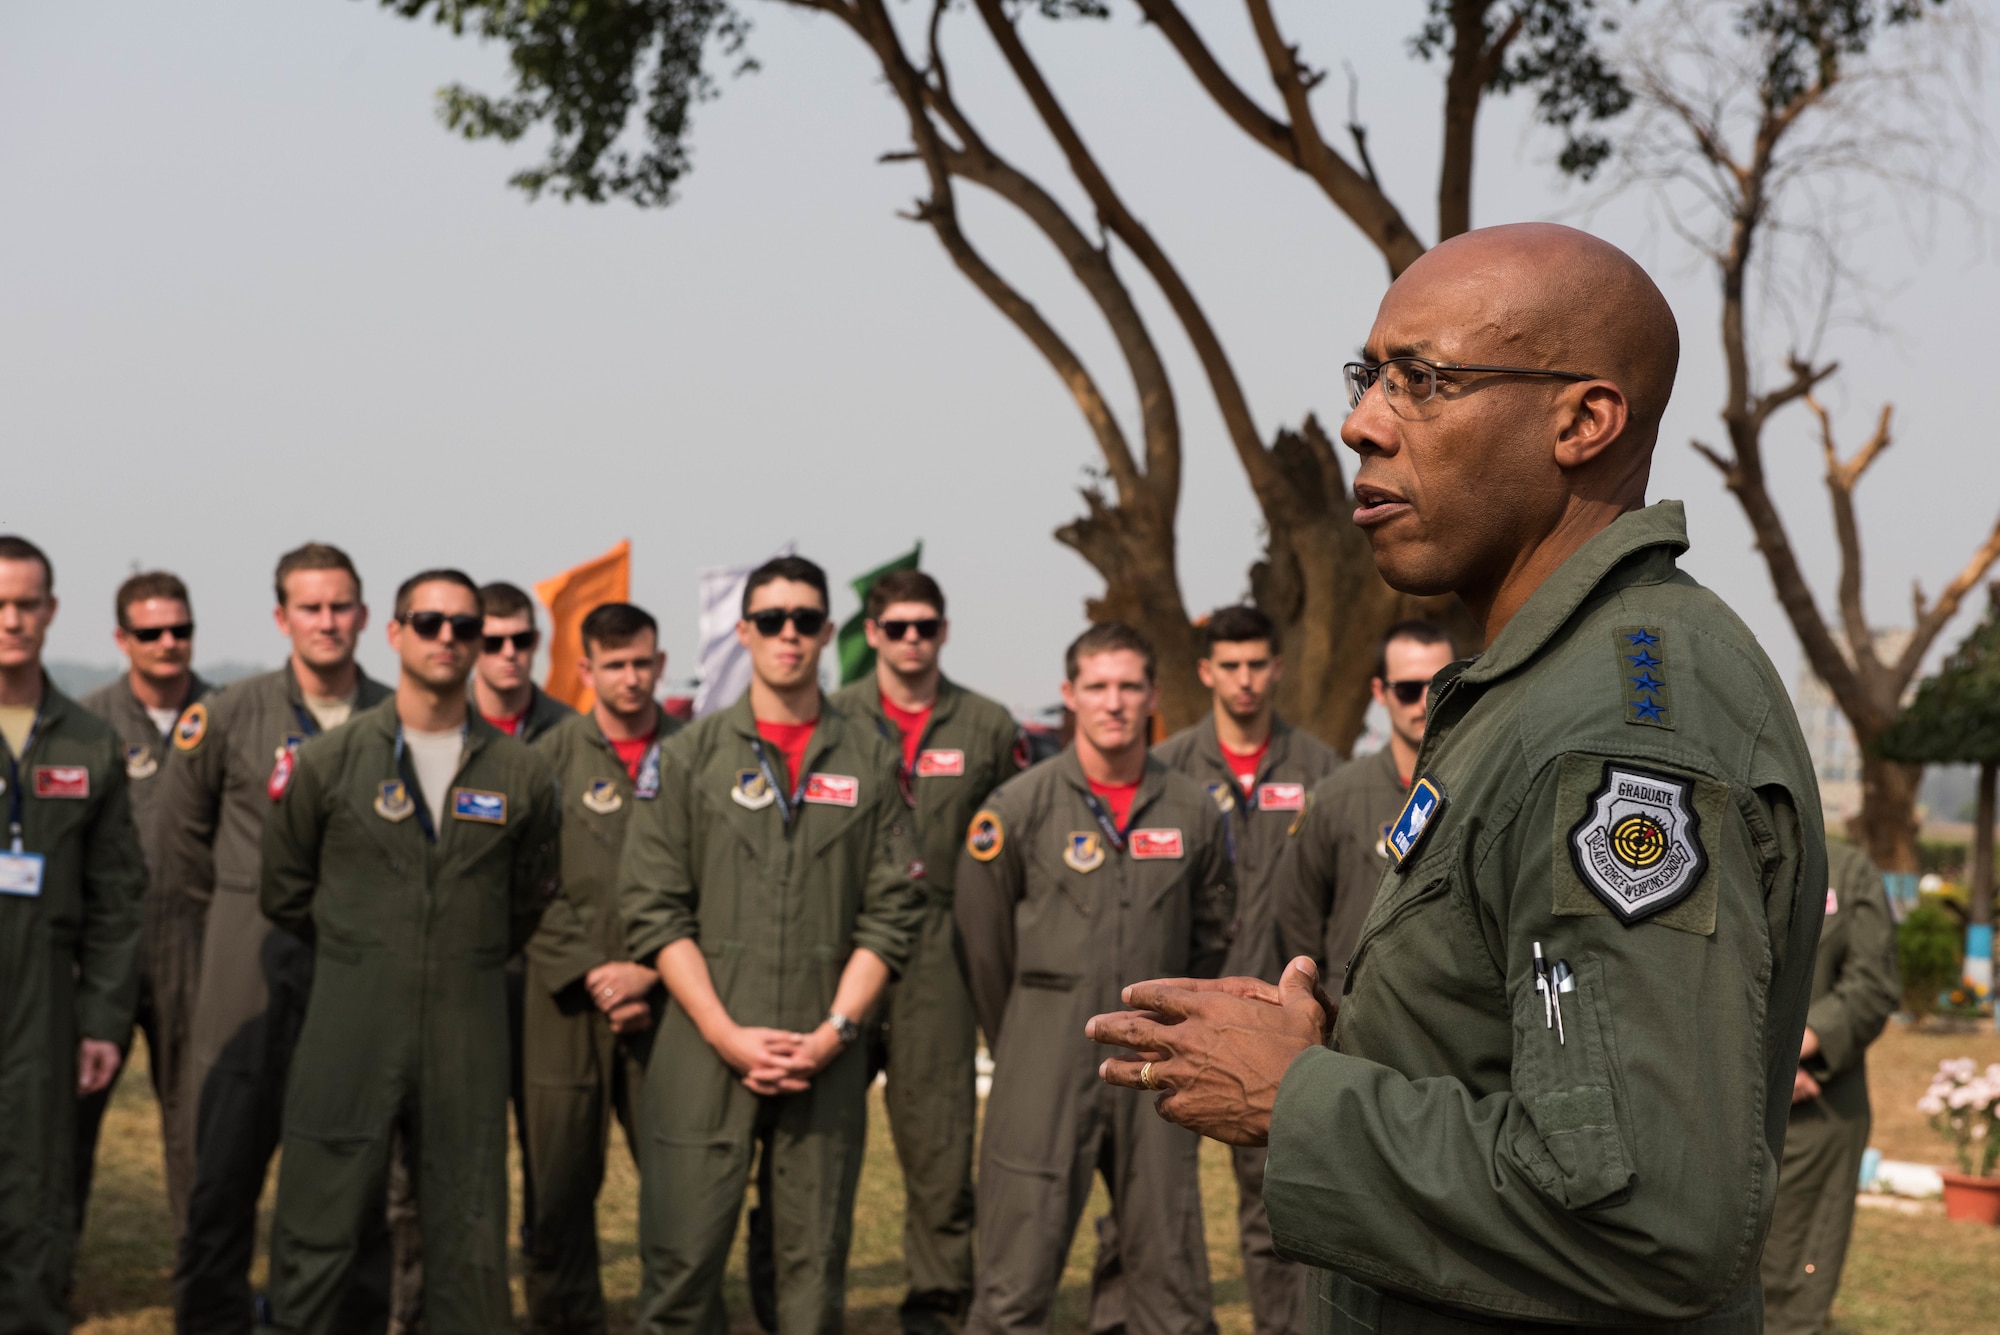 U.S. Air Force Gen. CQ Brown, Jr., Pacific Air Forces commander, speaks with Airmen from Kadena Air Base, Japan, and the Illinois Air National Guard at Cope India 19 at Kalaikunda Air Force Station, India, Dec. 14, 2018